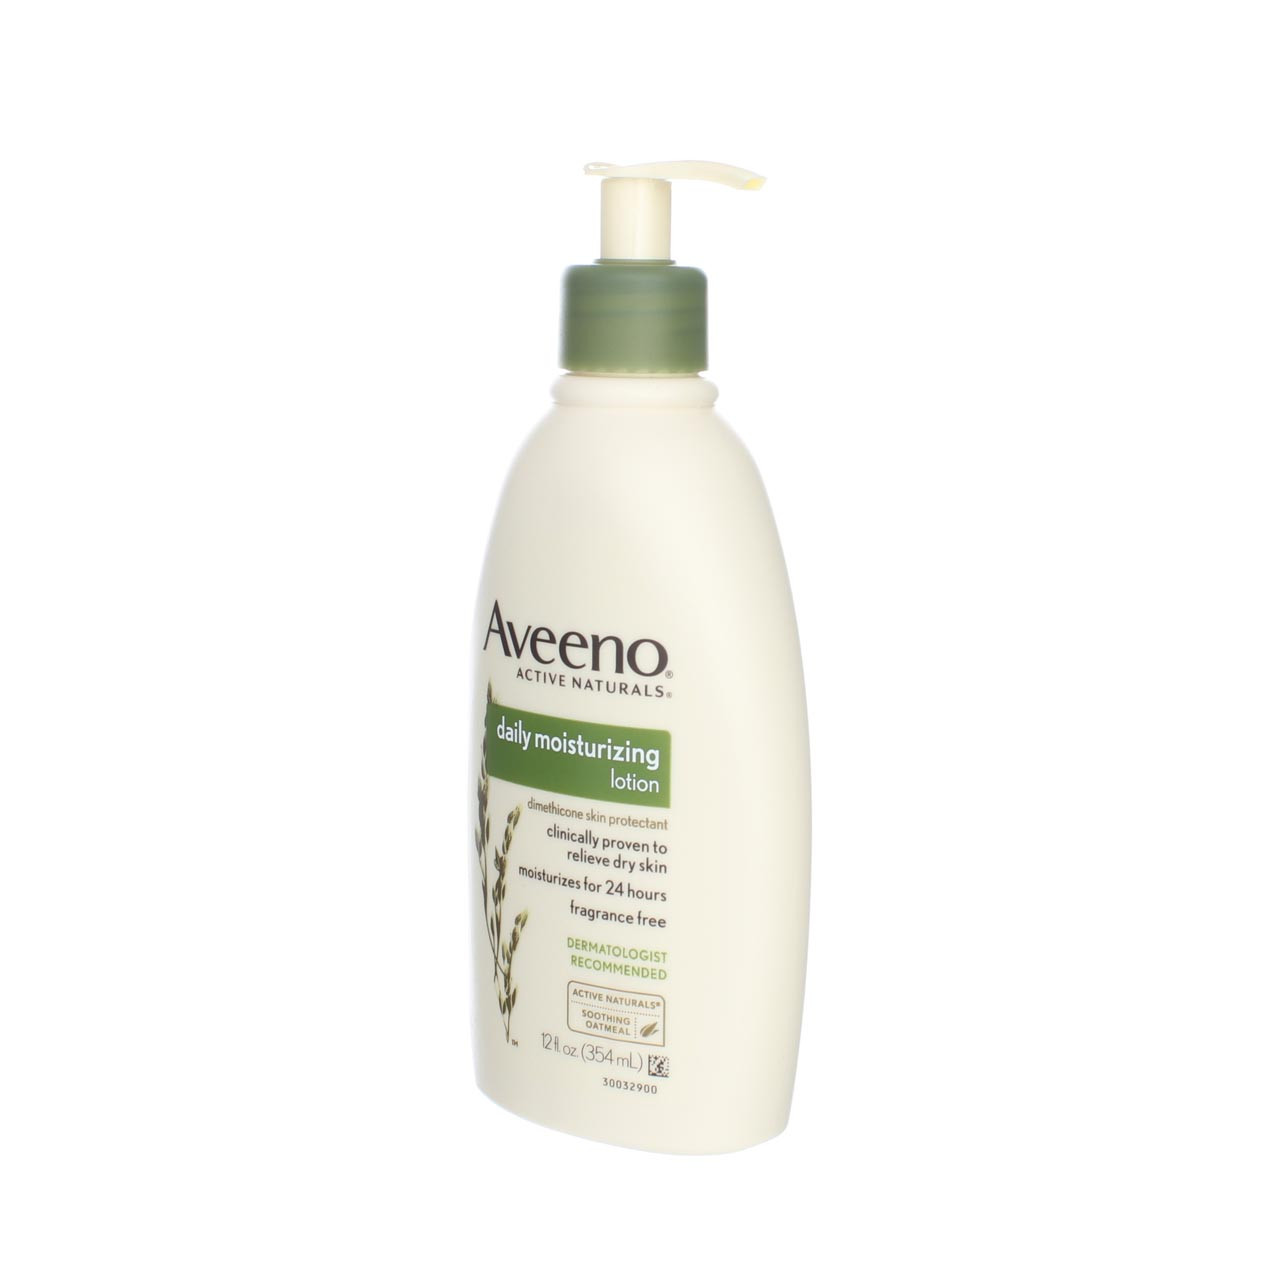 AVEENO Active Naturals Daily Moisturizing Lotion, Fragrance Free 12 oz (Pack of 2) - image 5 of 6